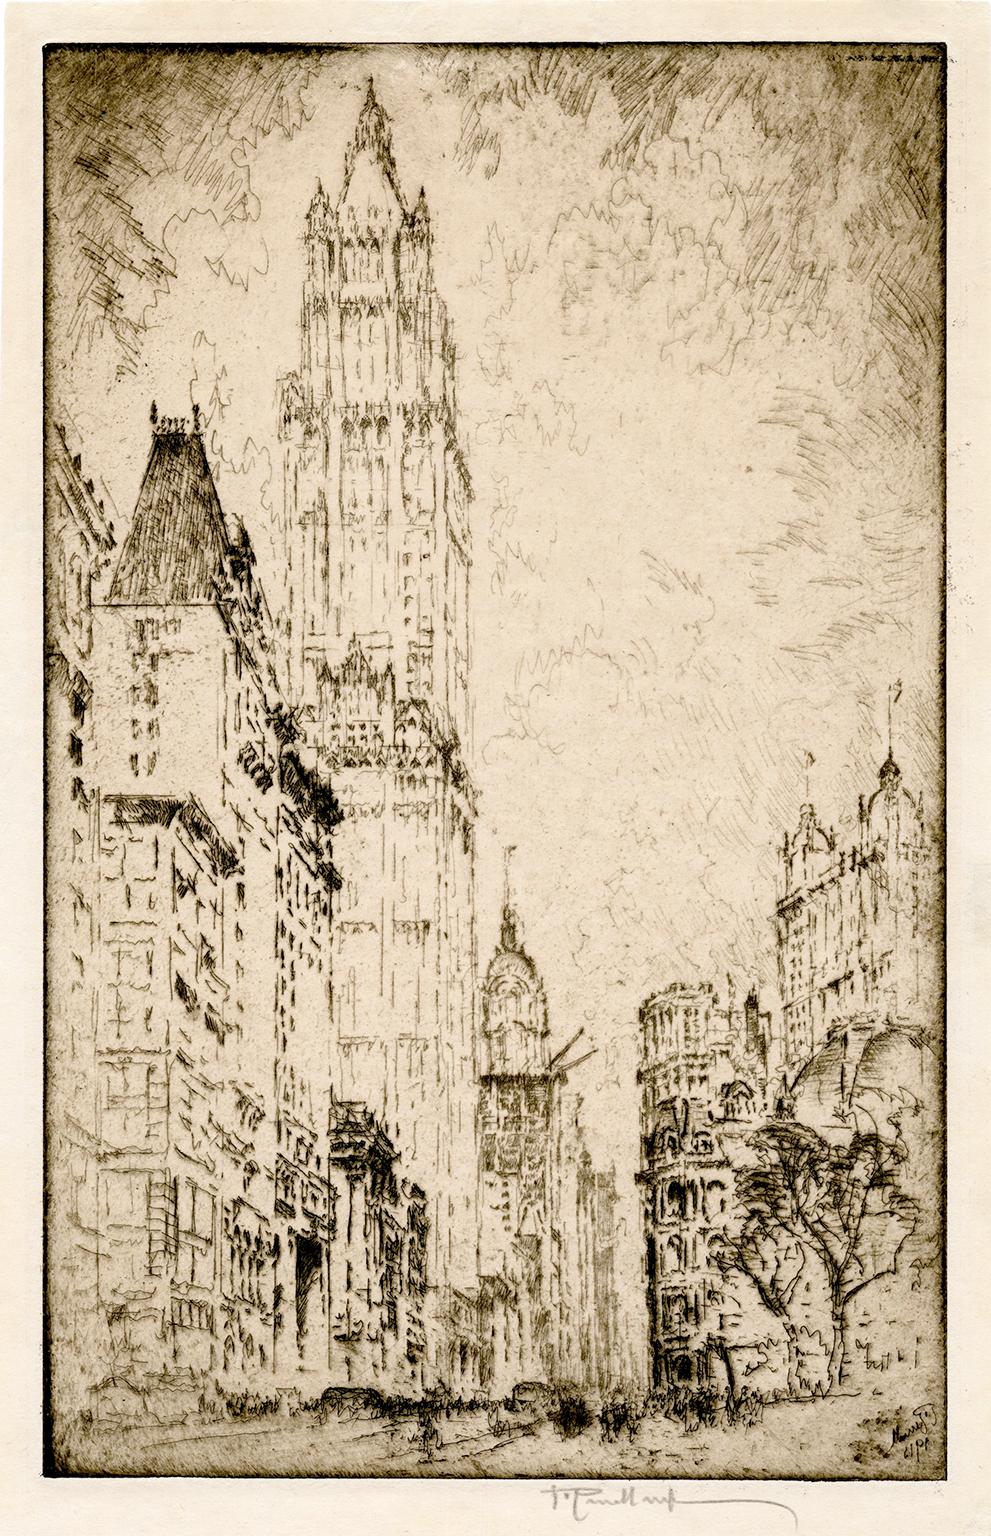 Joseph Pennell Figurative Print - The Woolworth Building — early 20th-Century New York City